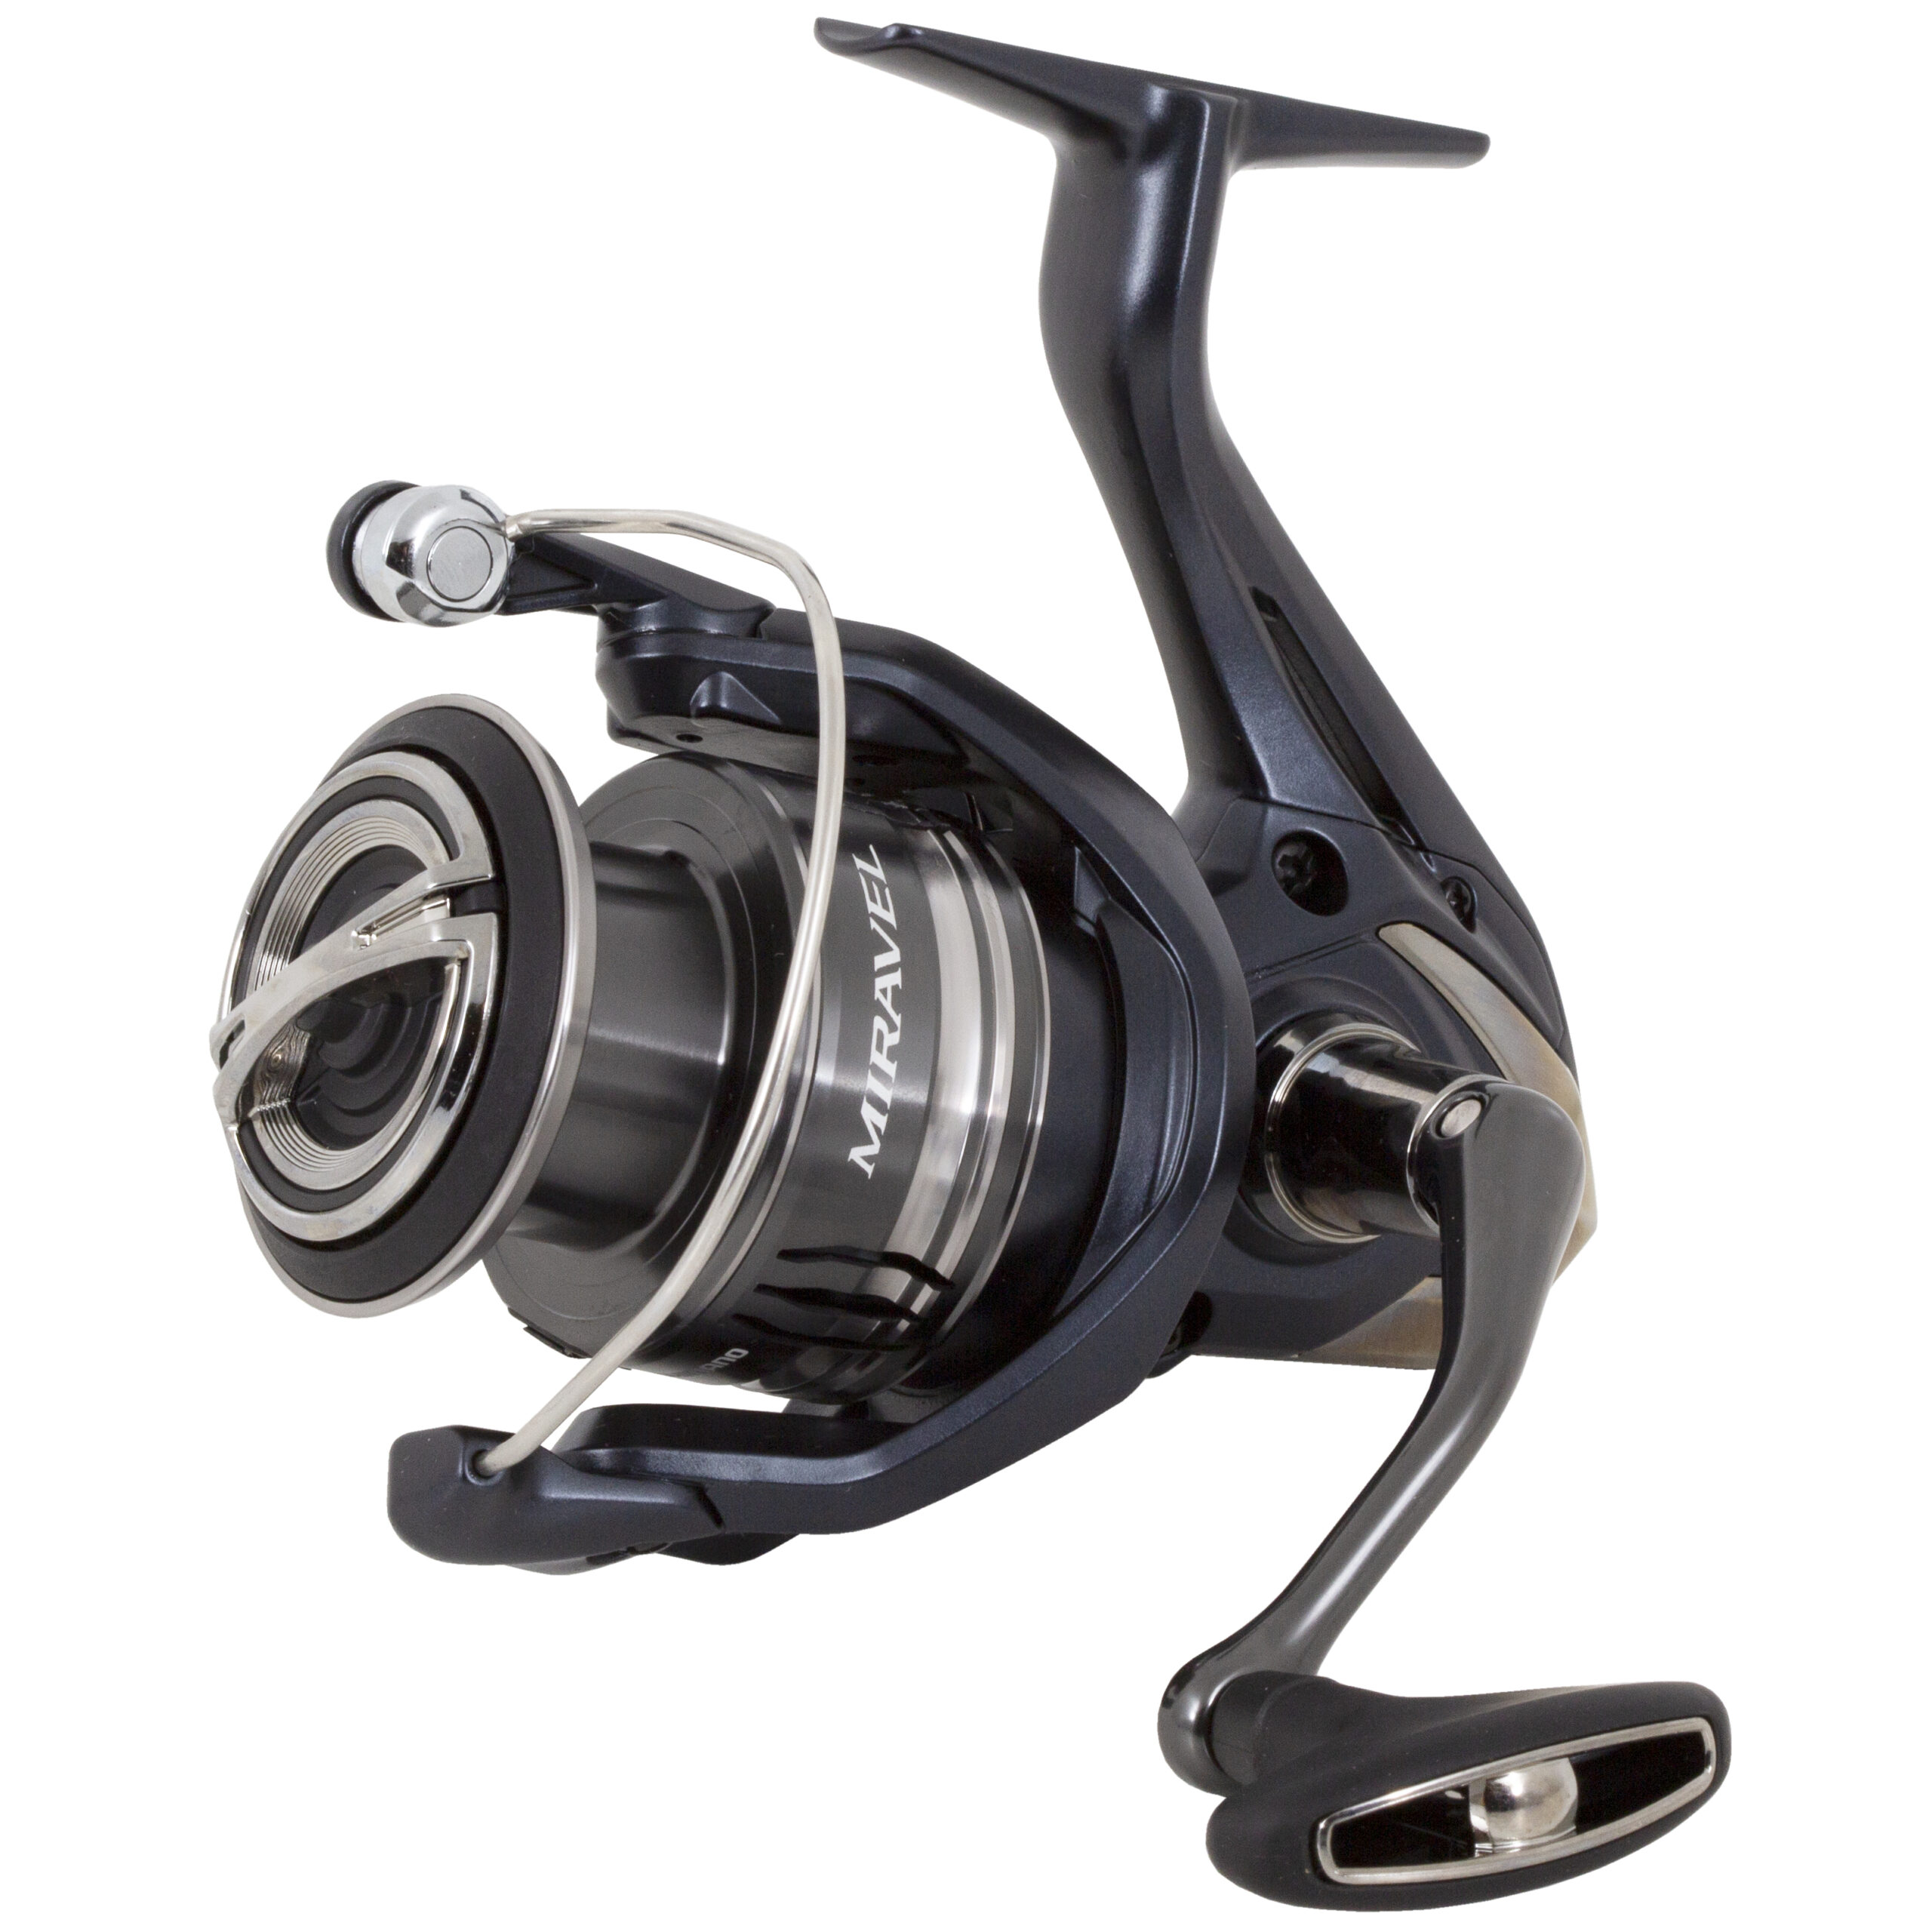 SHIMANO MIRAVEL - TOP 3 THINGS YOU NEED TO KNOW 